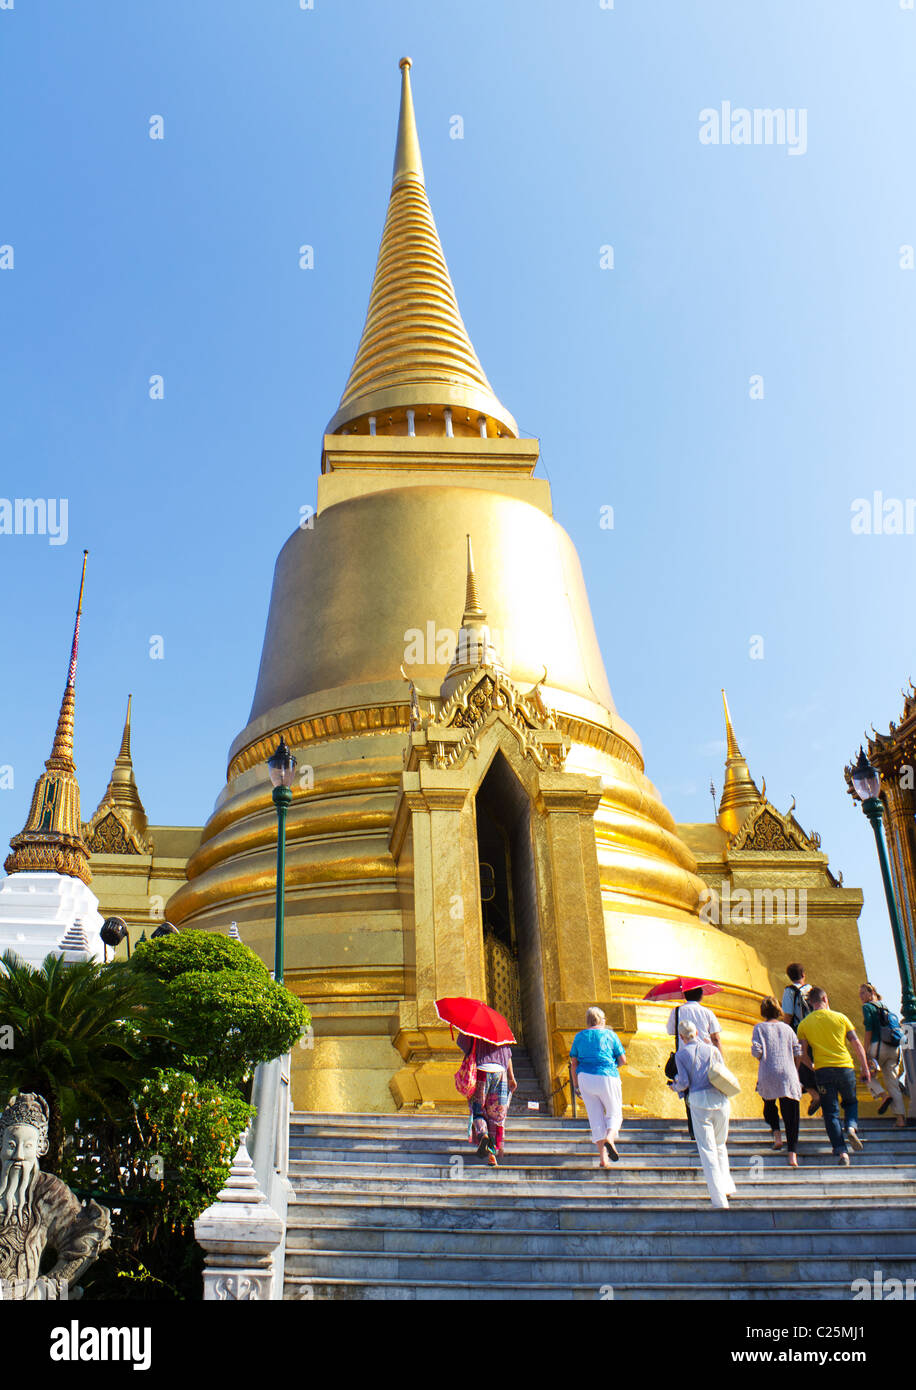 Tourists Visiting the Grand Palace and Temple of the Emerald Buddha in Bangkok, Thailand Stock Photo